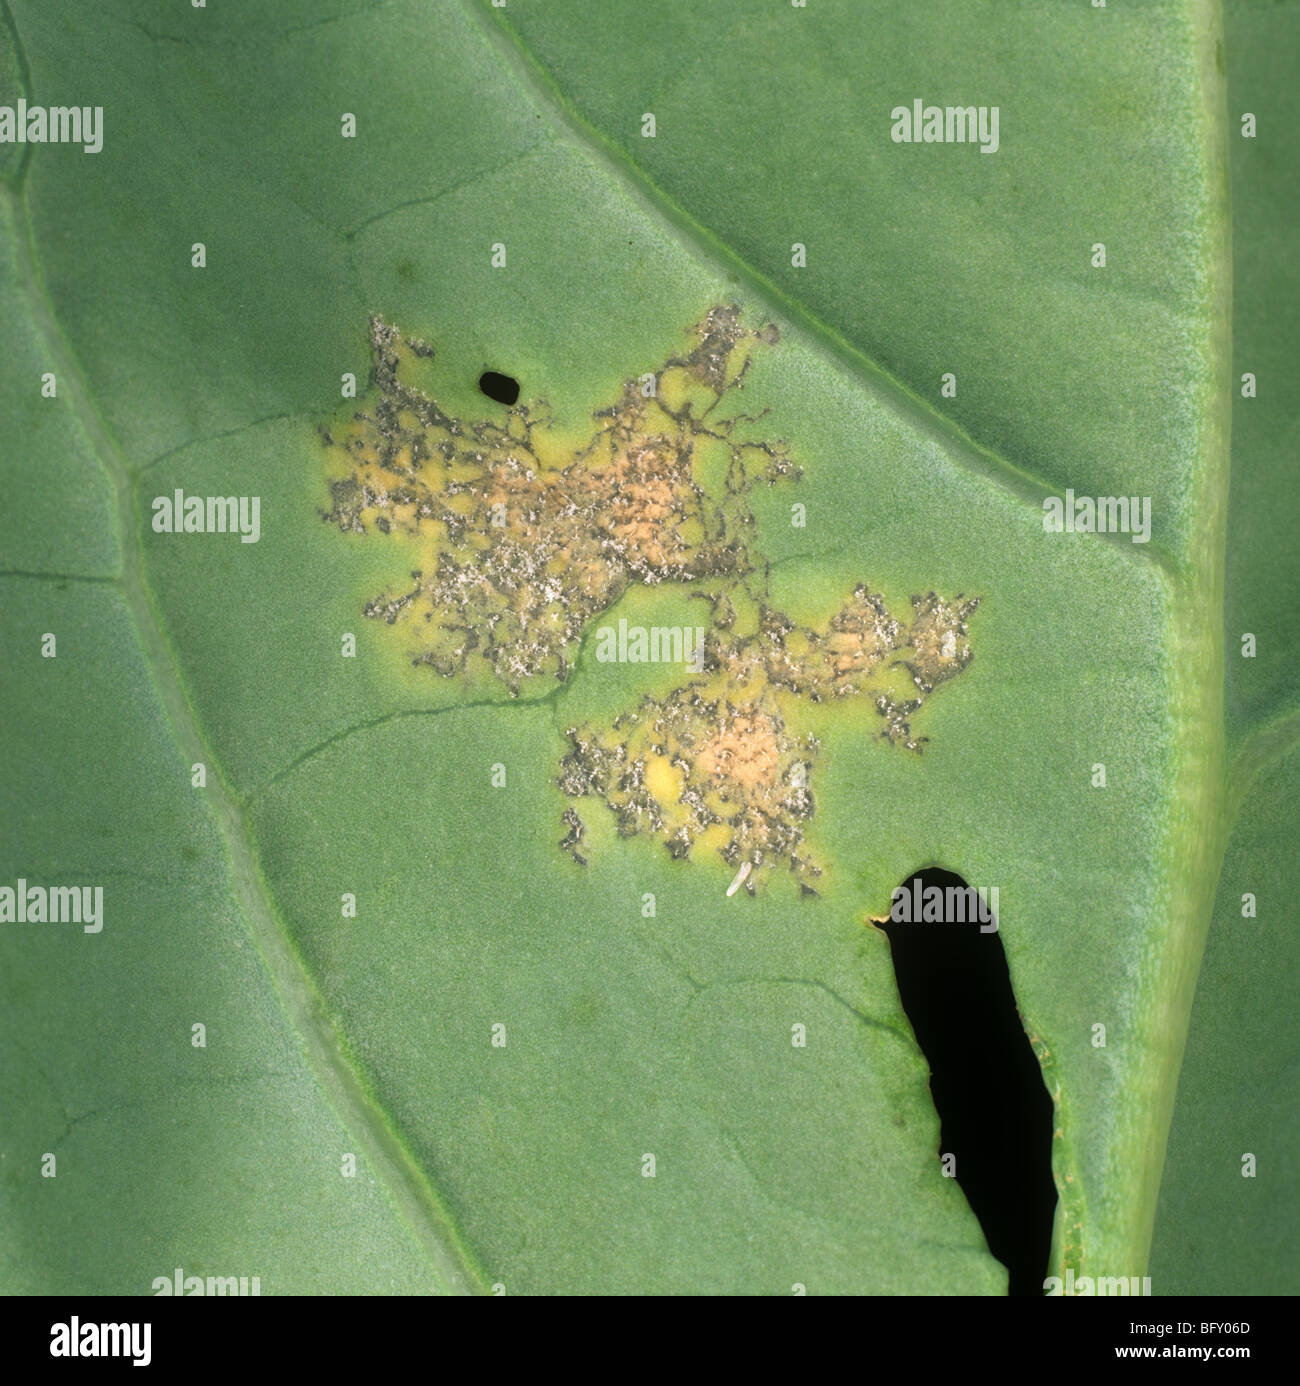 Downy mildew (Peronospora parasitica) lesions and mycelium on a calabrese leaf underside Stock Photo